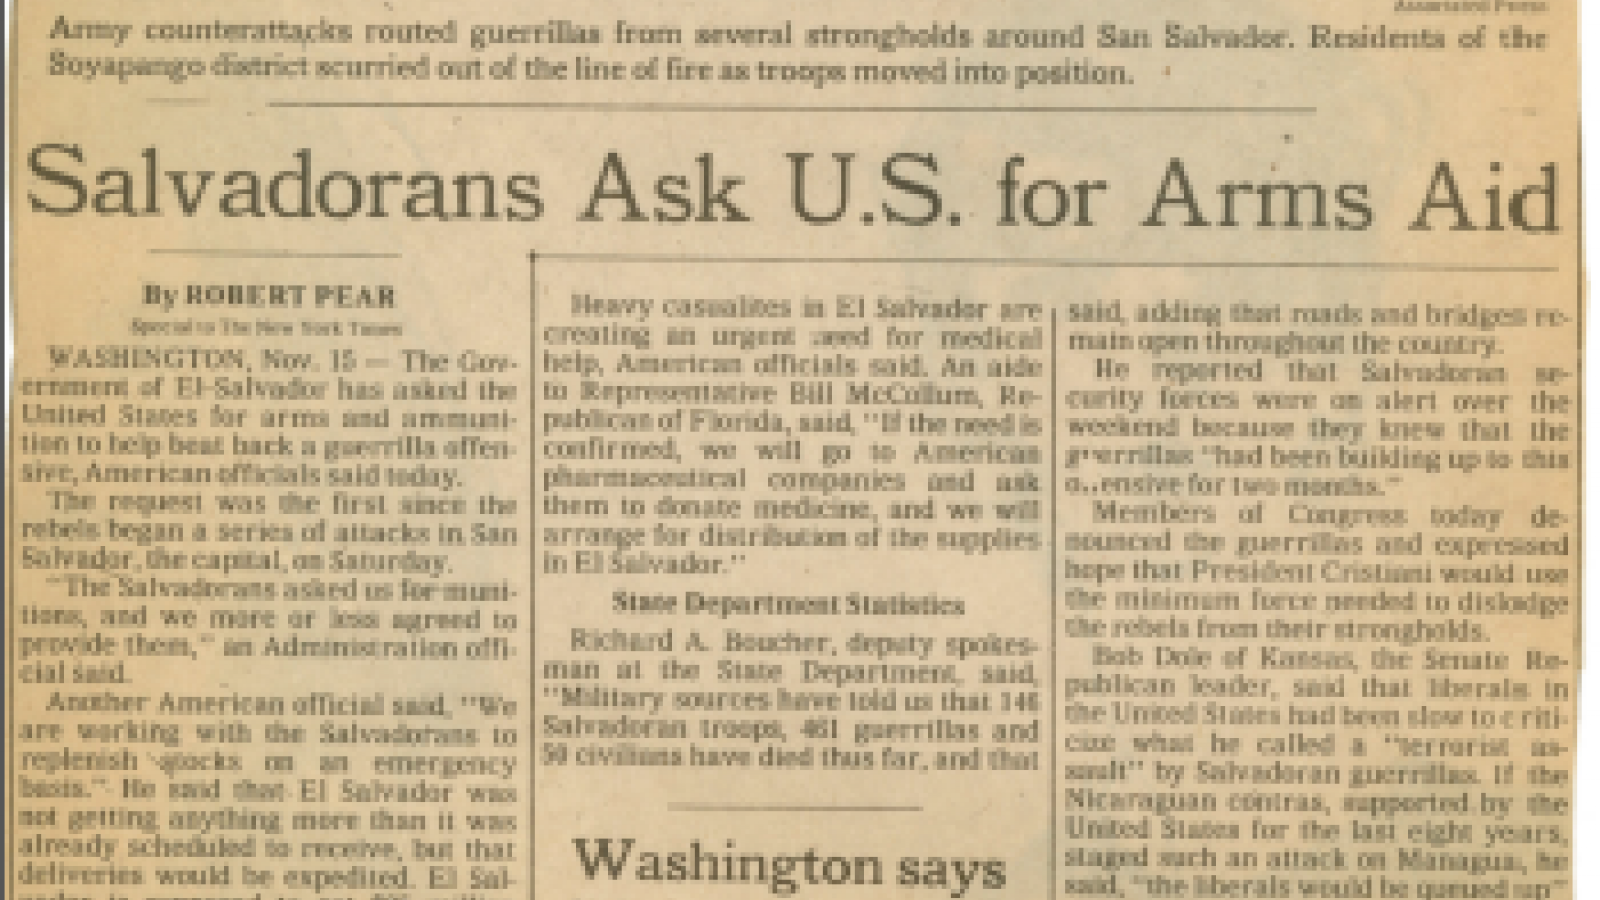 Salvadorans Ask U.S. for Arms Aid. New York Times.